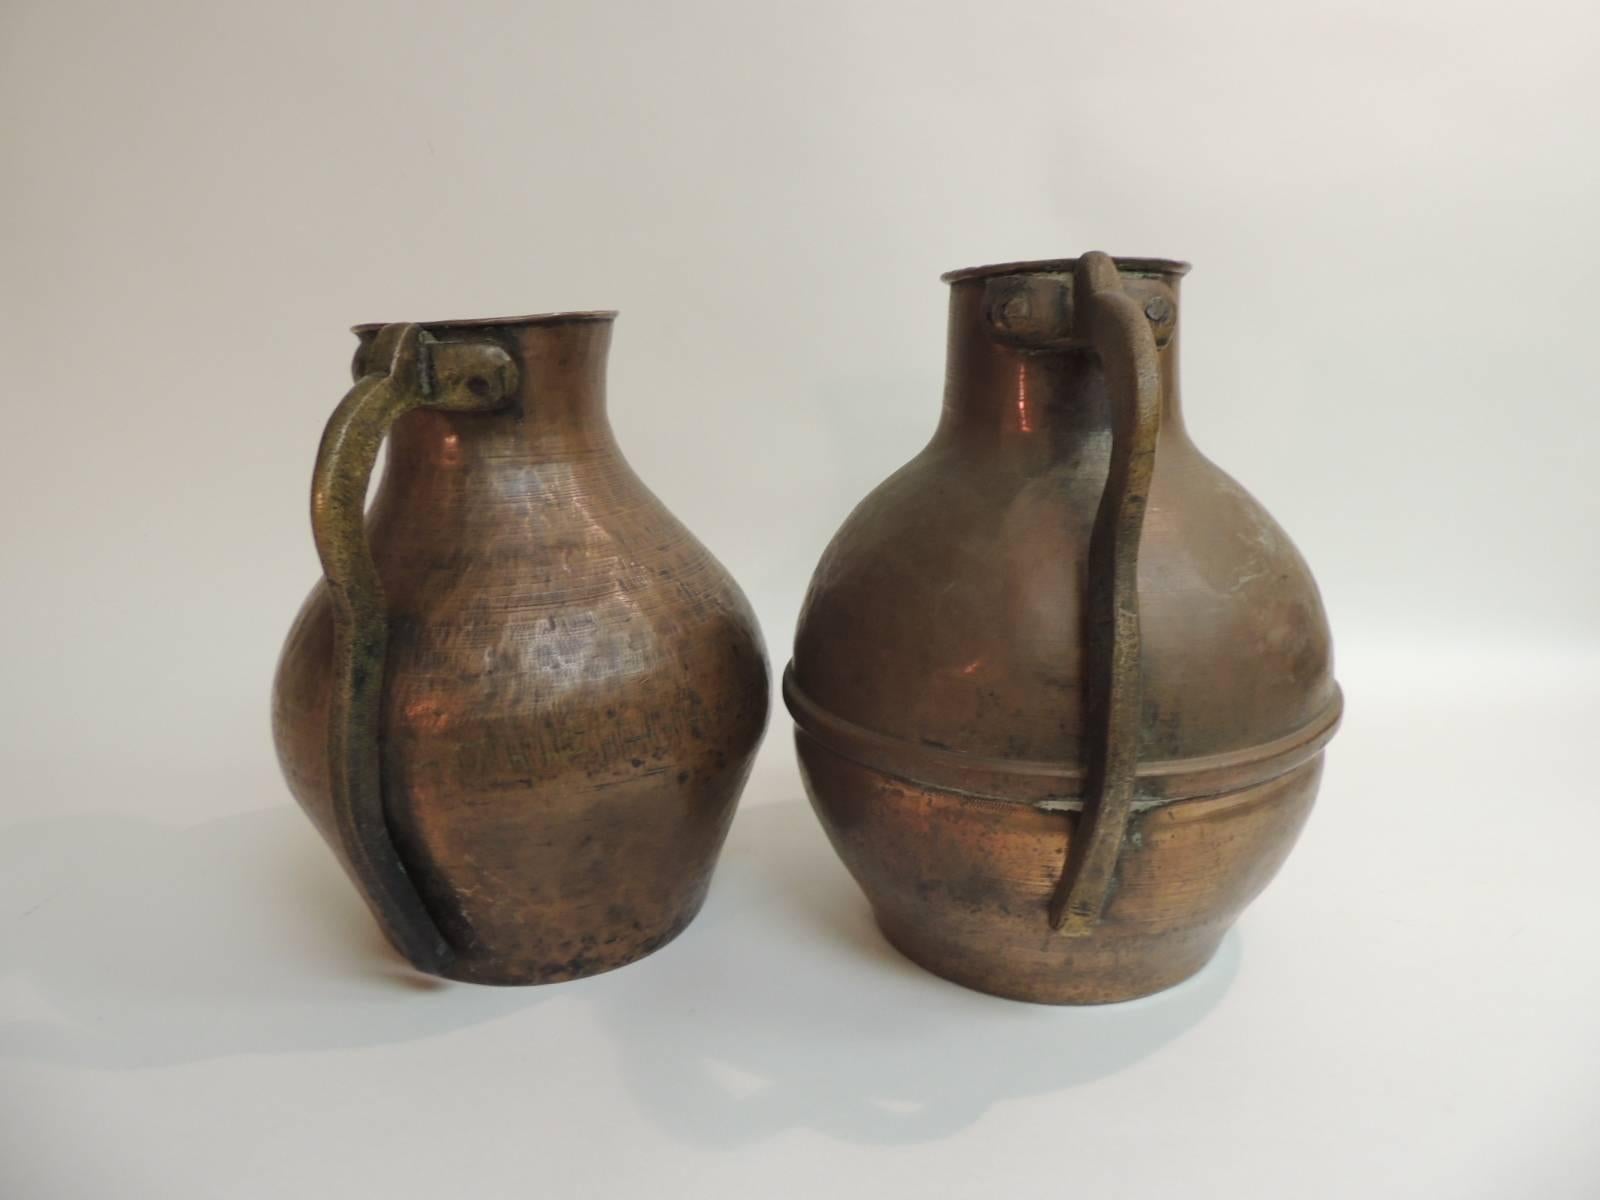 Offered by the Antique Textiles Galleries:
Pair of Heavy Patina Persian Copper Water Jugs with Handles
Pair of heavy patinated Persian copper water jugs with handles. Heavy thick textured copper with thick patinated brass handles.
Size: (right) 10 x